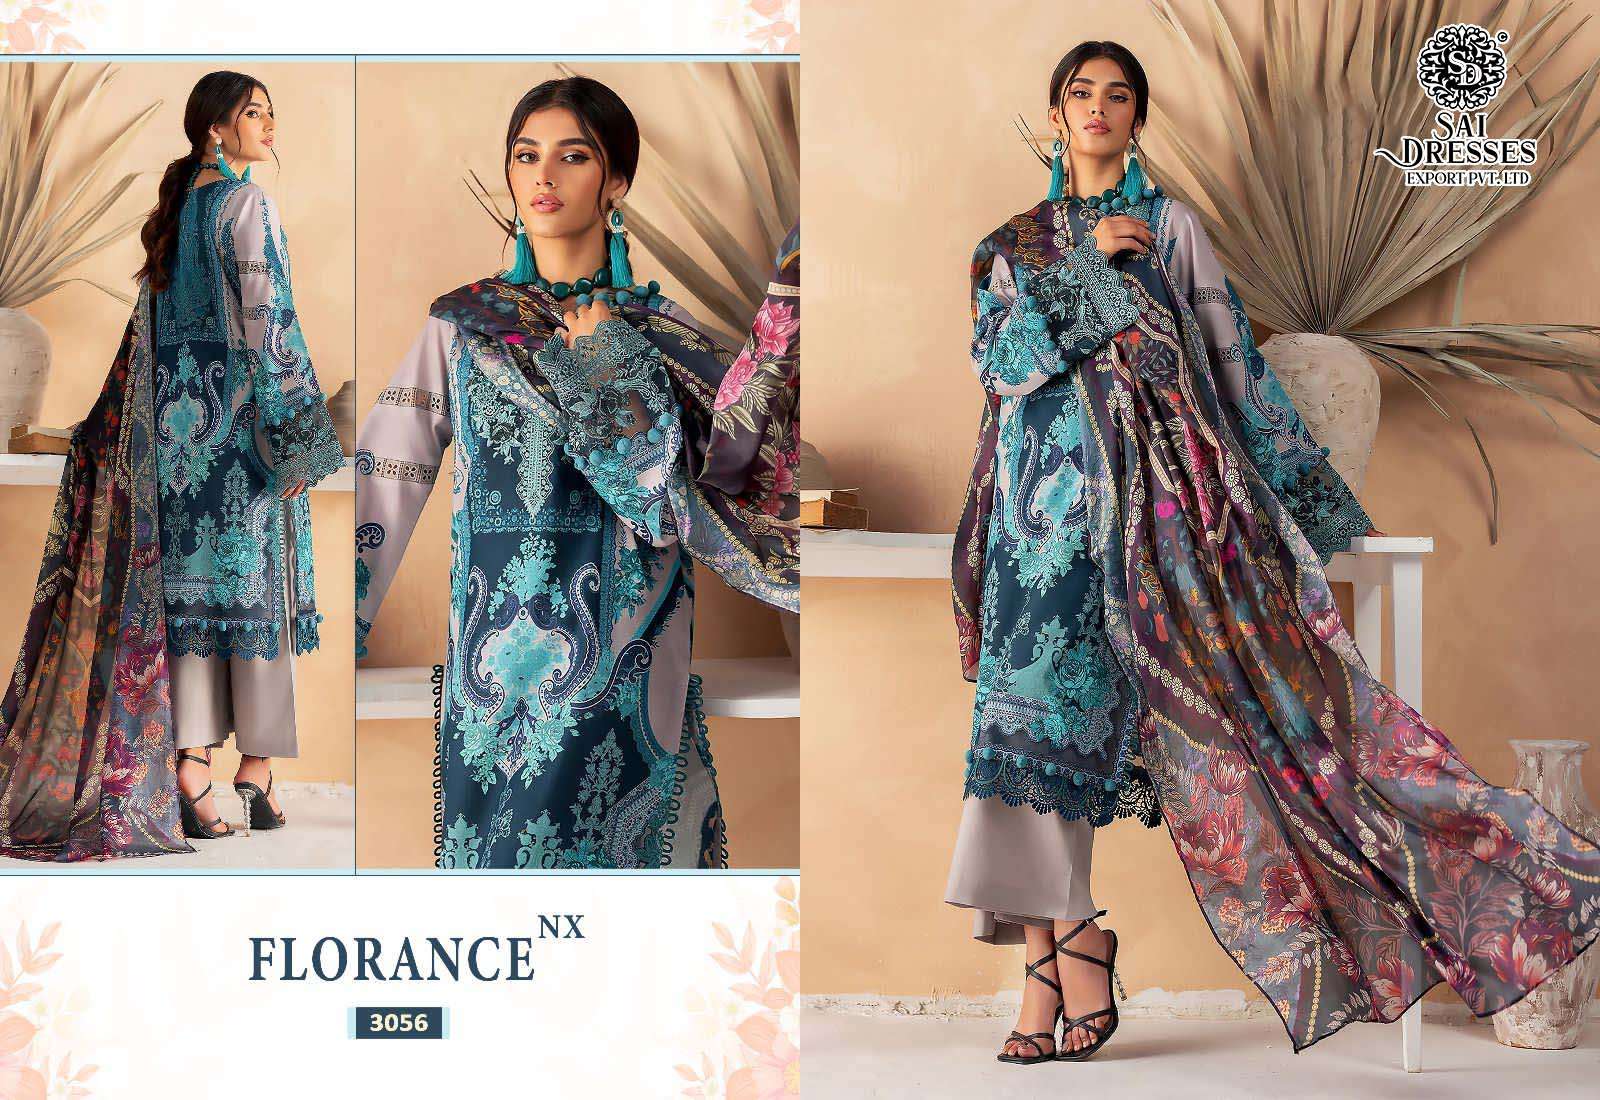 SAI DRESSES PRESENT FLORANCE NX PURE COTTON HEAVY PATCH EMBROIDERED PAKISTANI DESIGNER SUITS IN WHOLESALE RATE IN SURAT